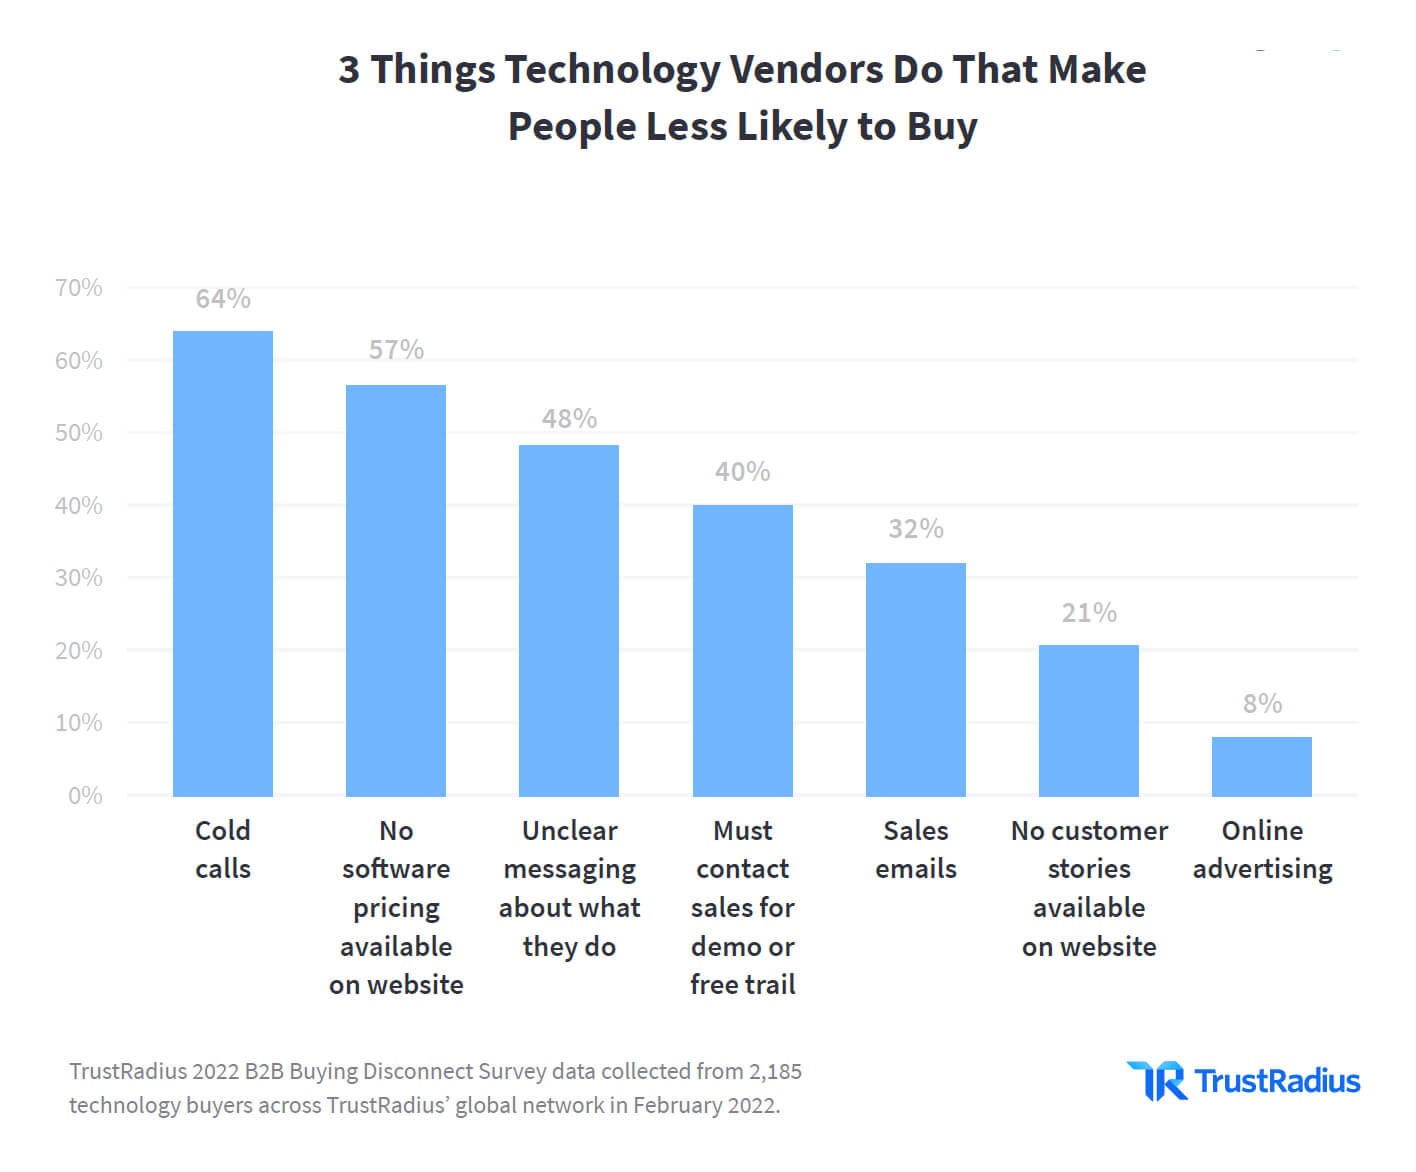 3 Things tech vendors do that make people less likely to buy